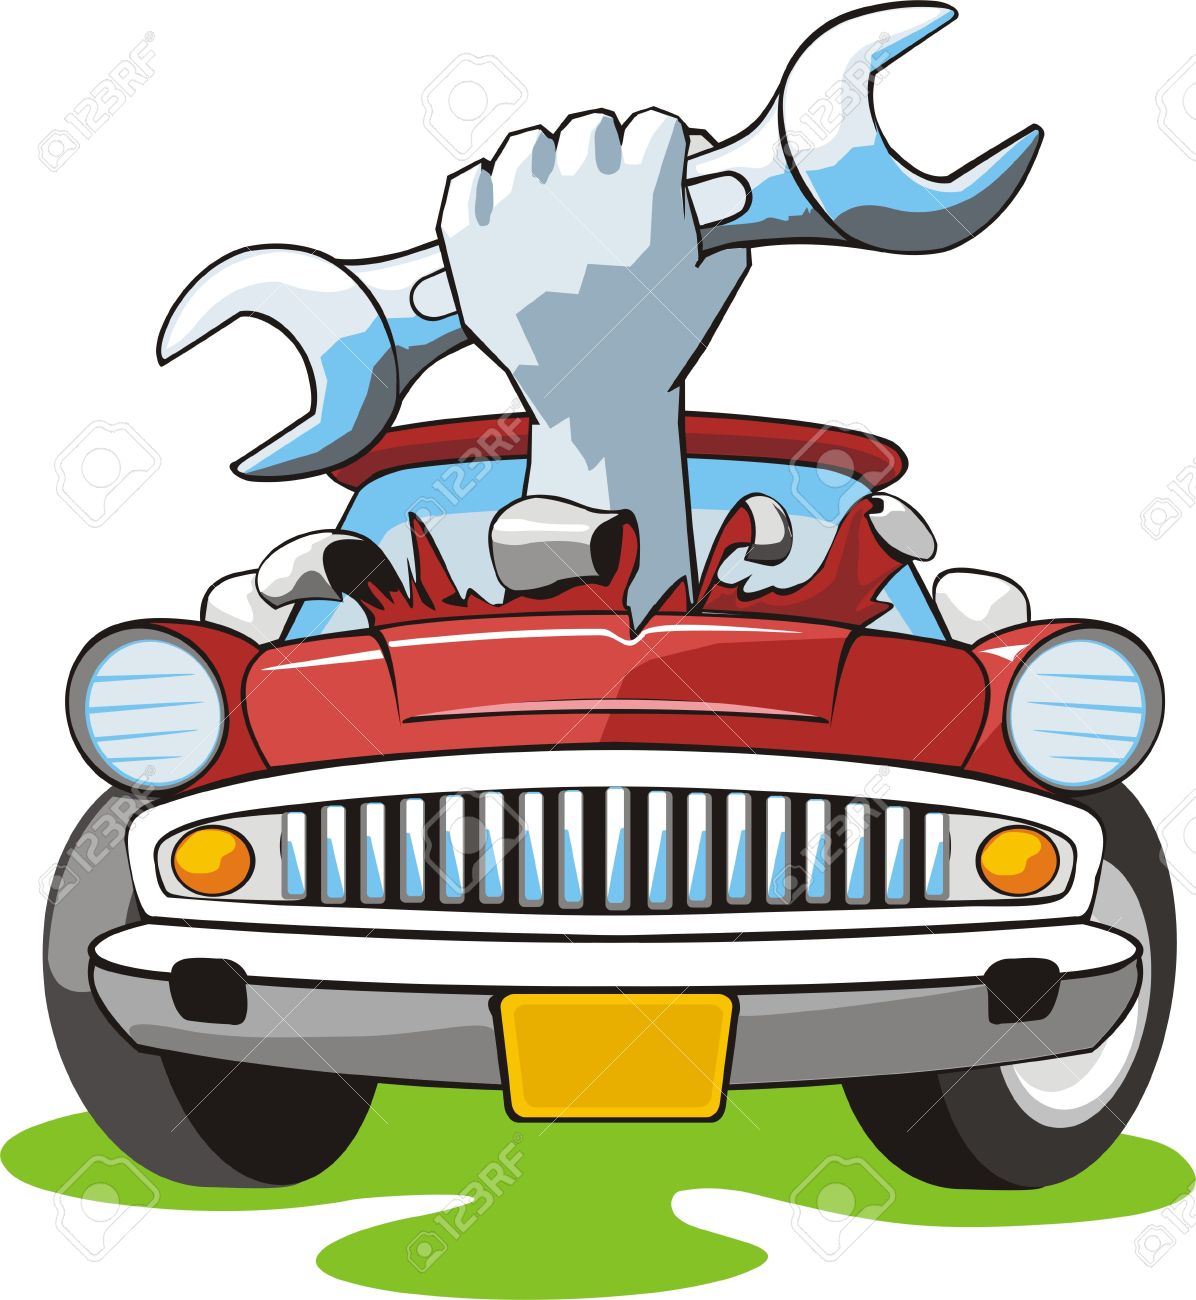 Auto Tools Clipart And Stock  - Auto Repair Clipart